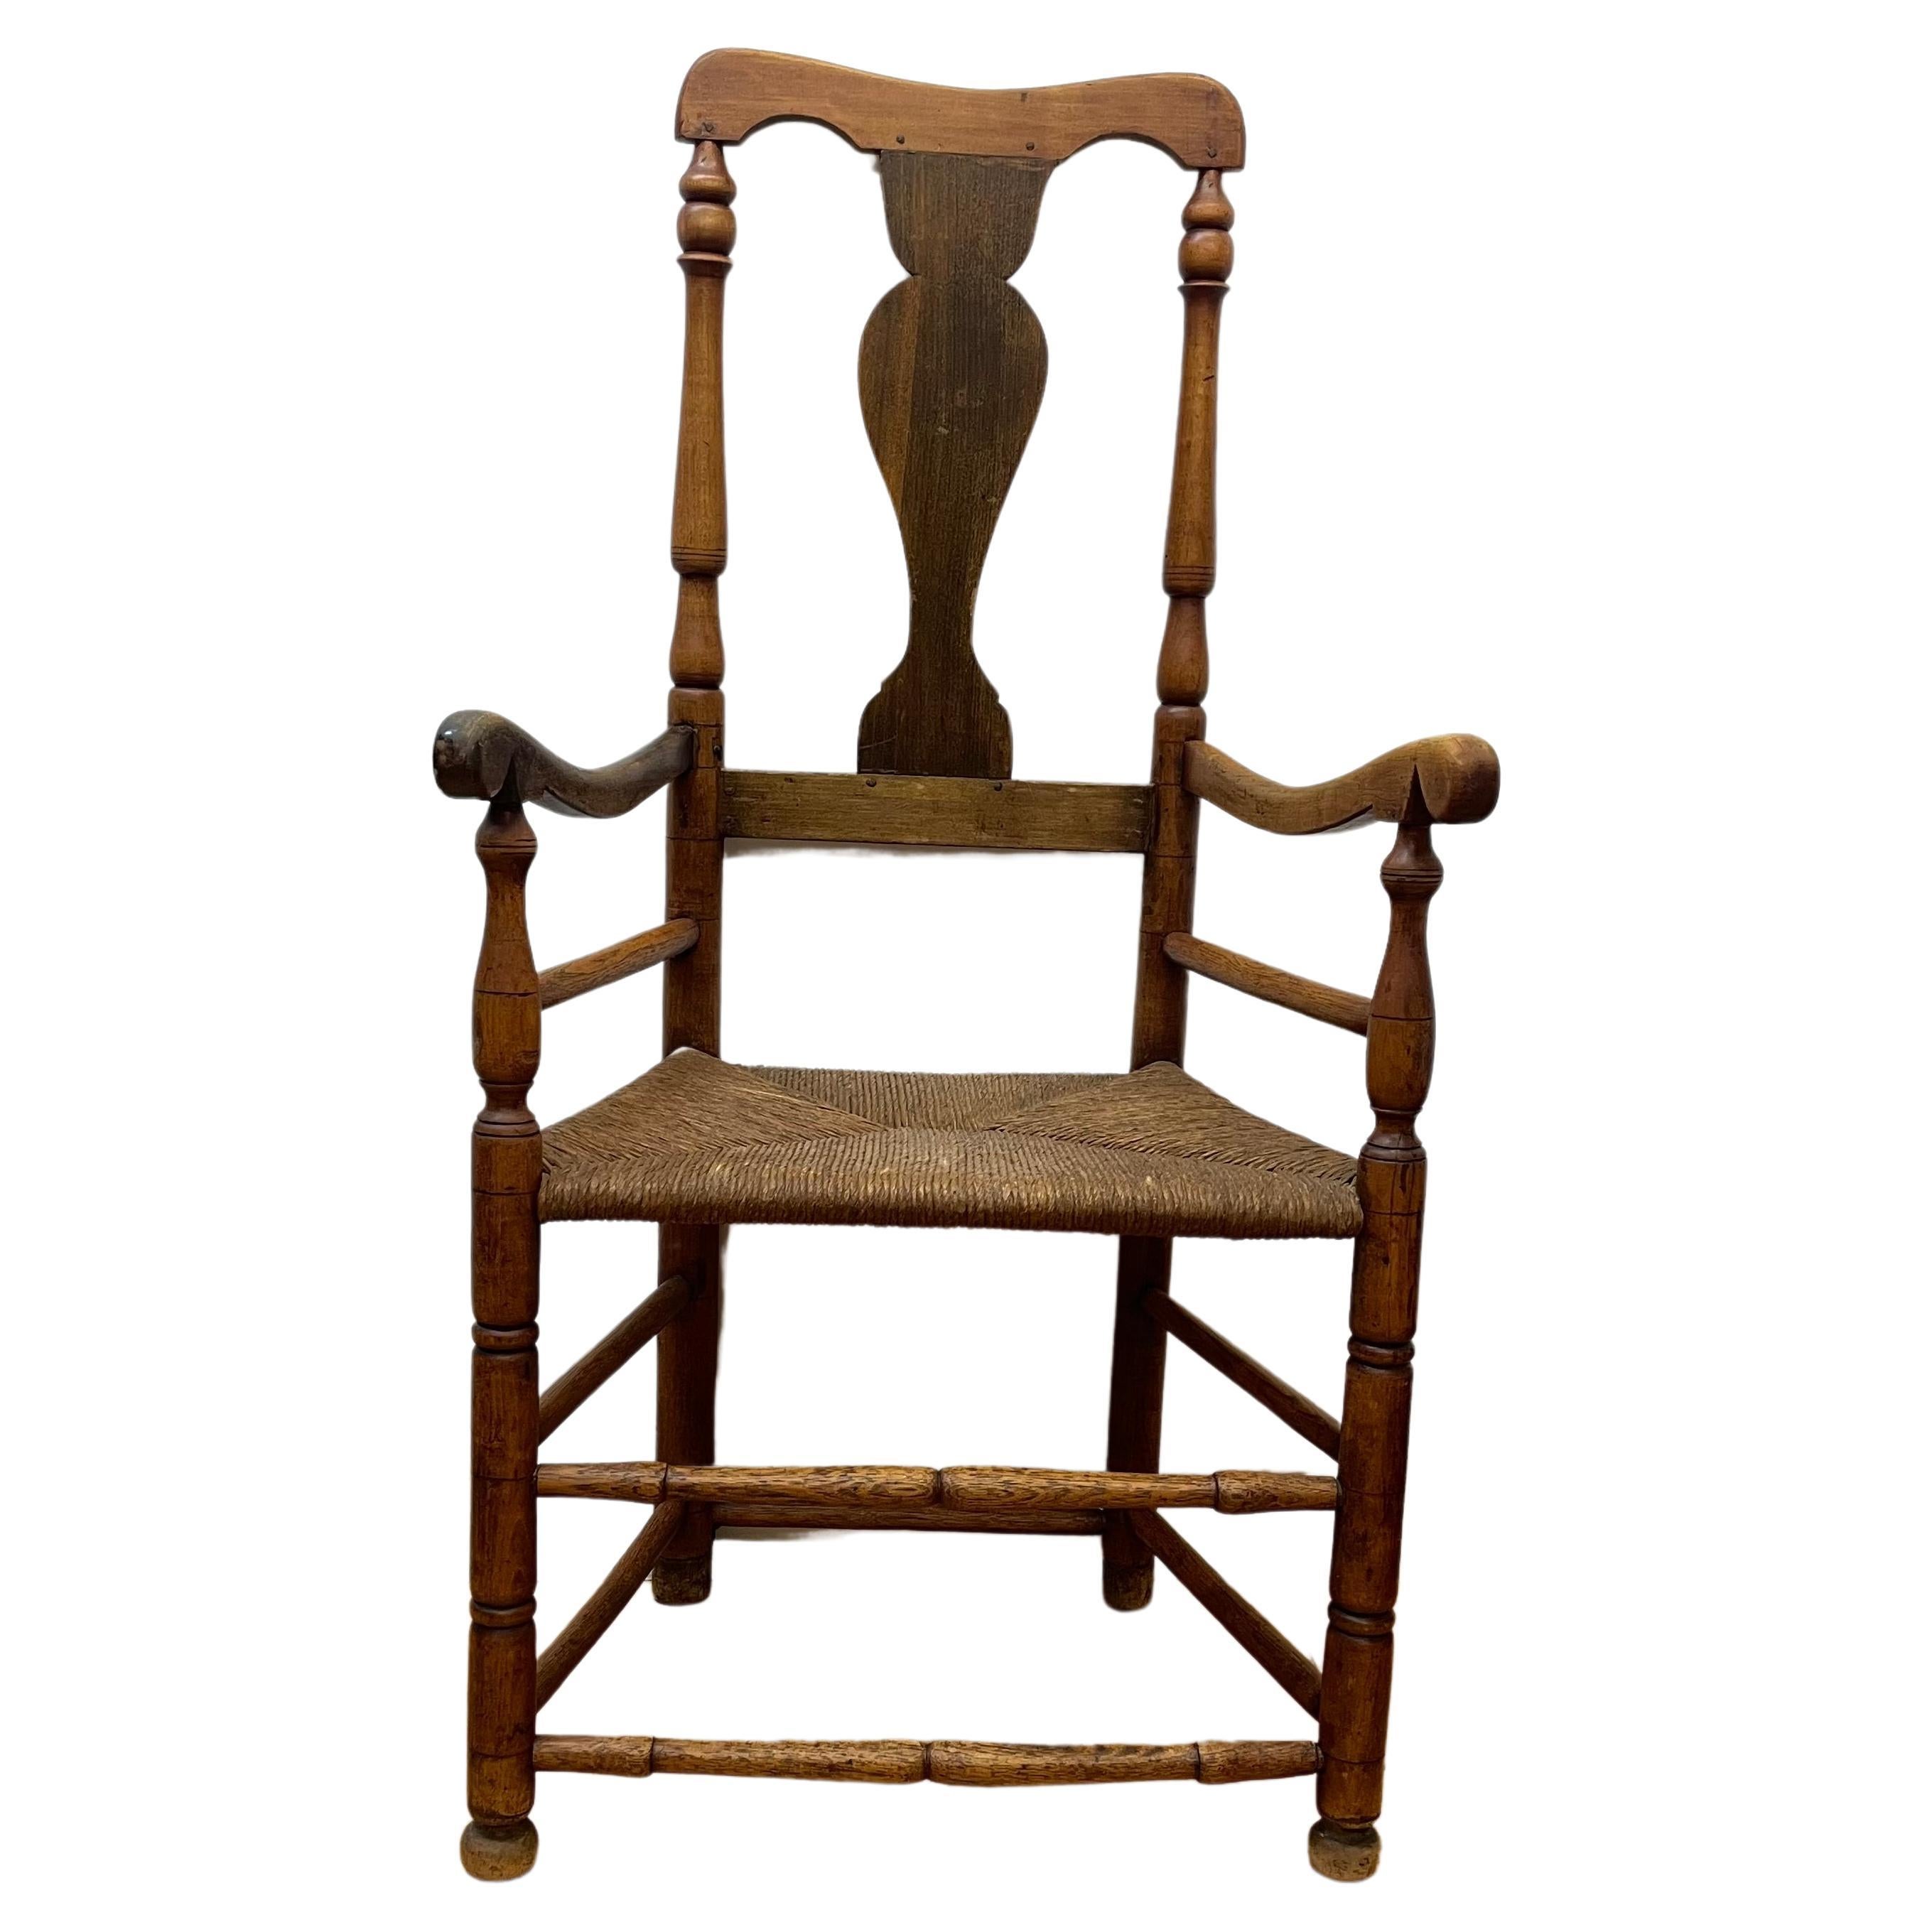 Queen Anne armchair late 18th early 19th century possibly Wallace Nutting  For Sale